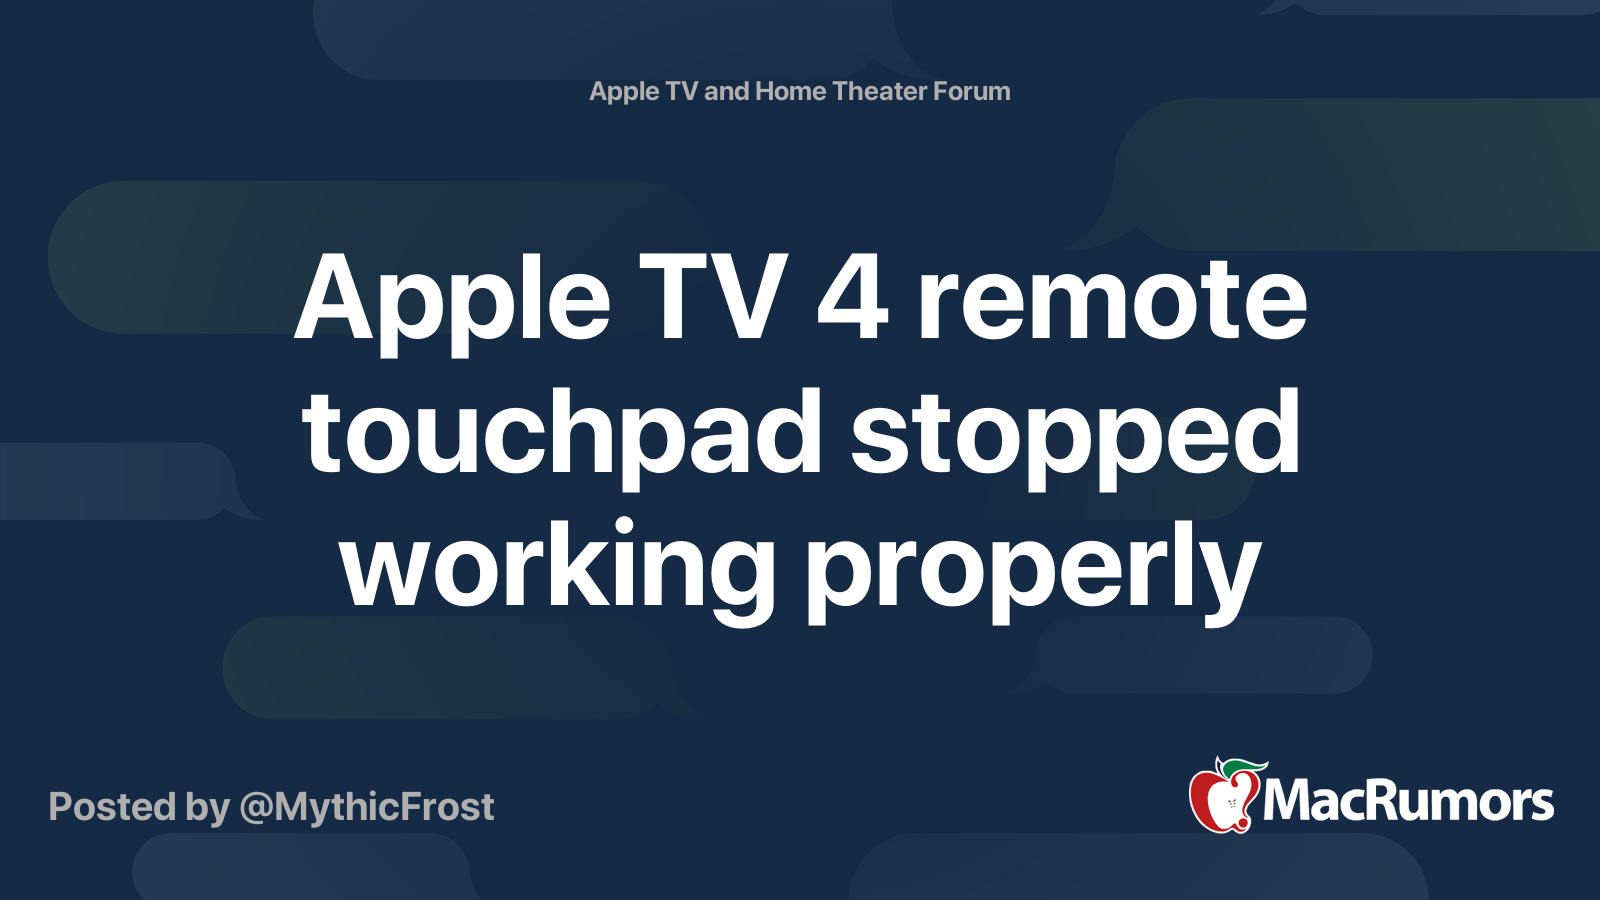 Apple TV remote touchpad stopped properly | MacRumors